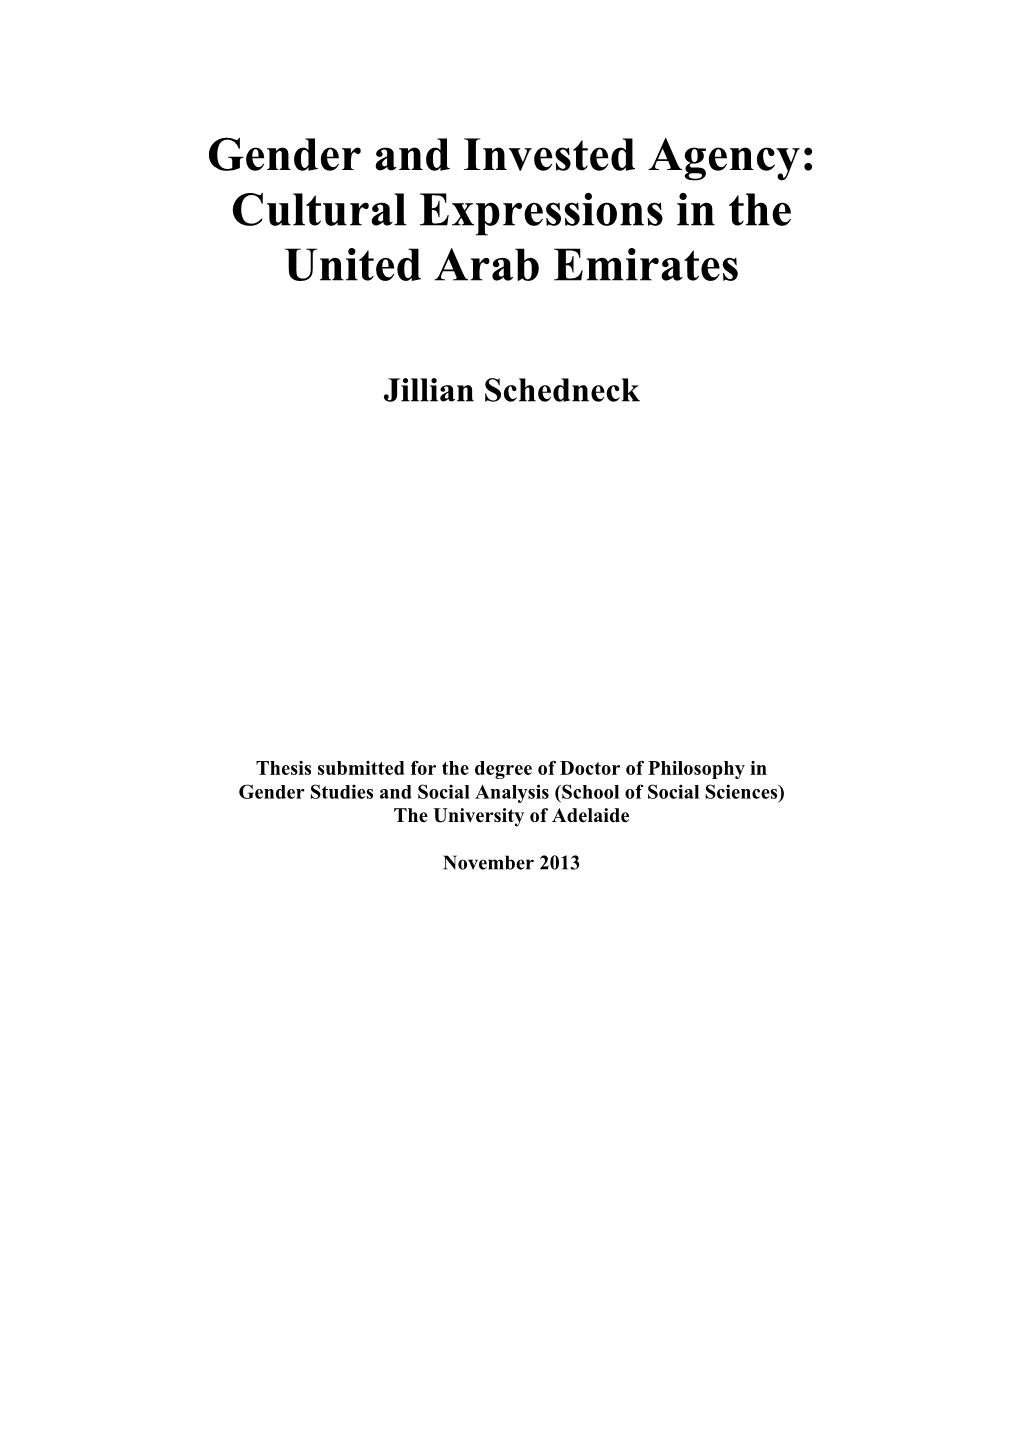 Cultural Expressions in the United Arab Emirates